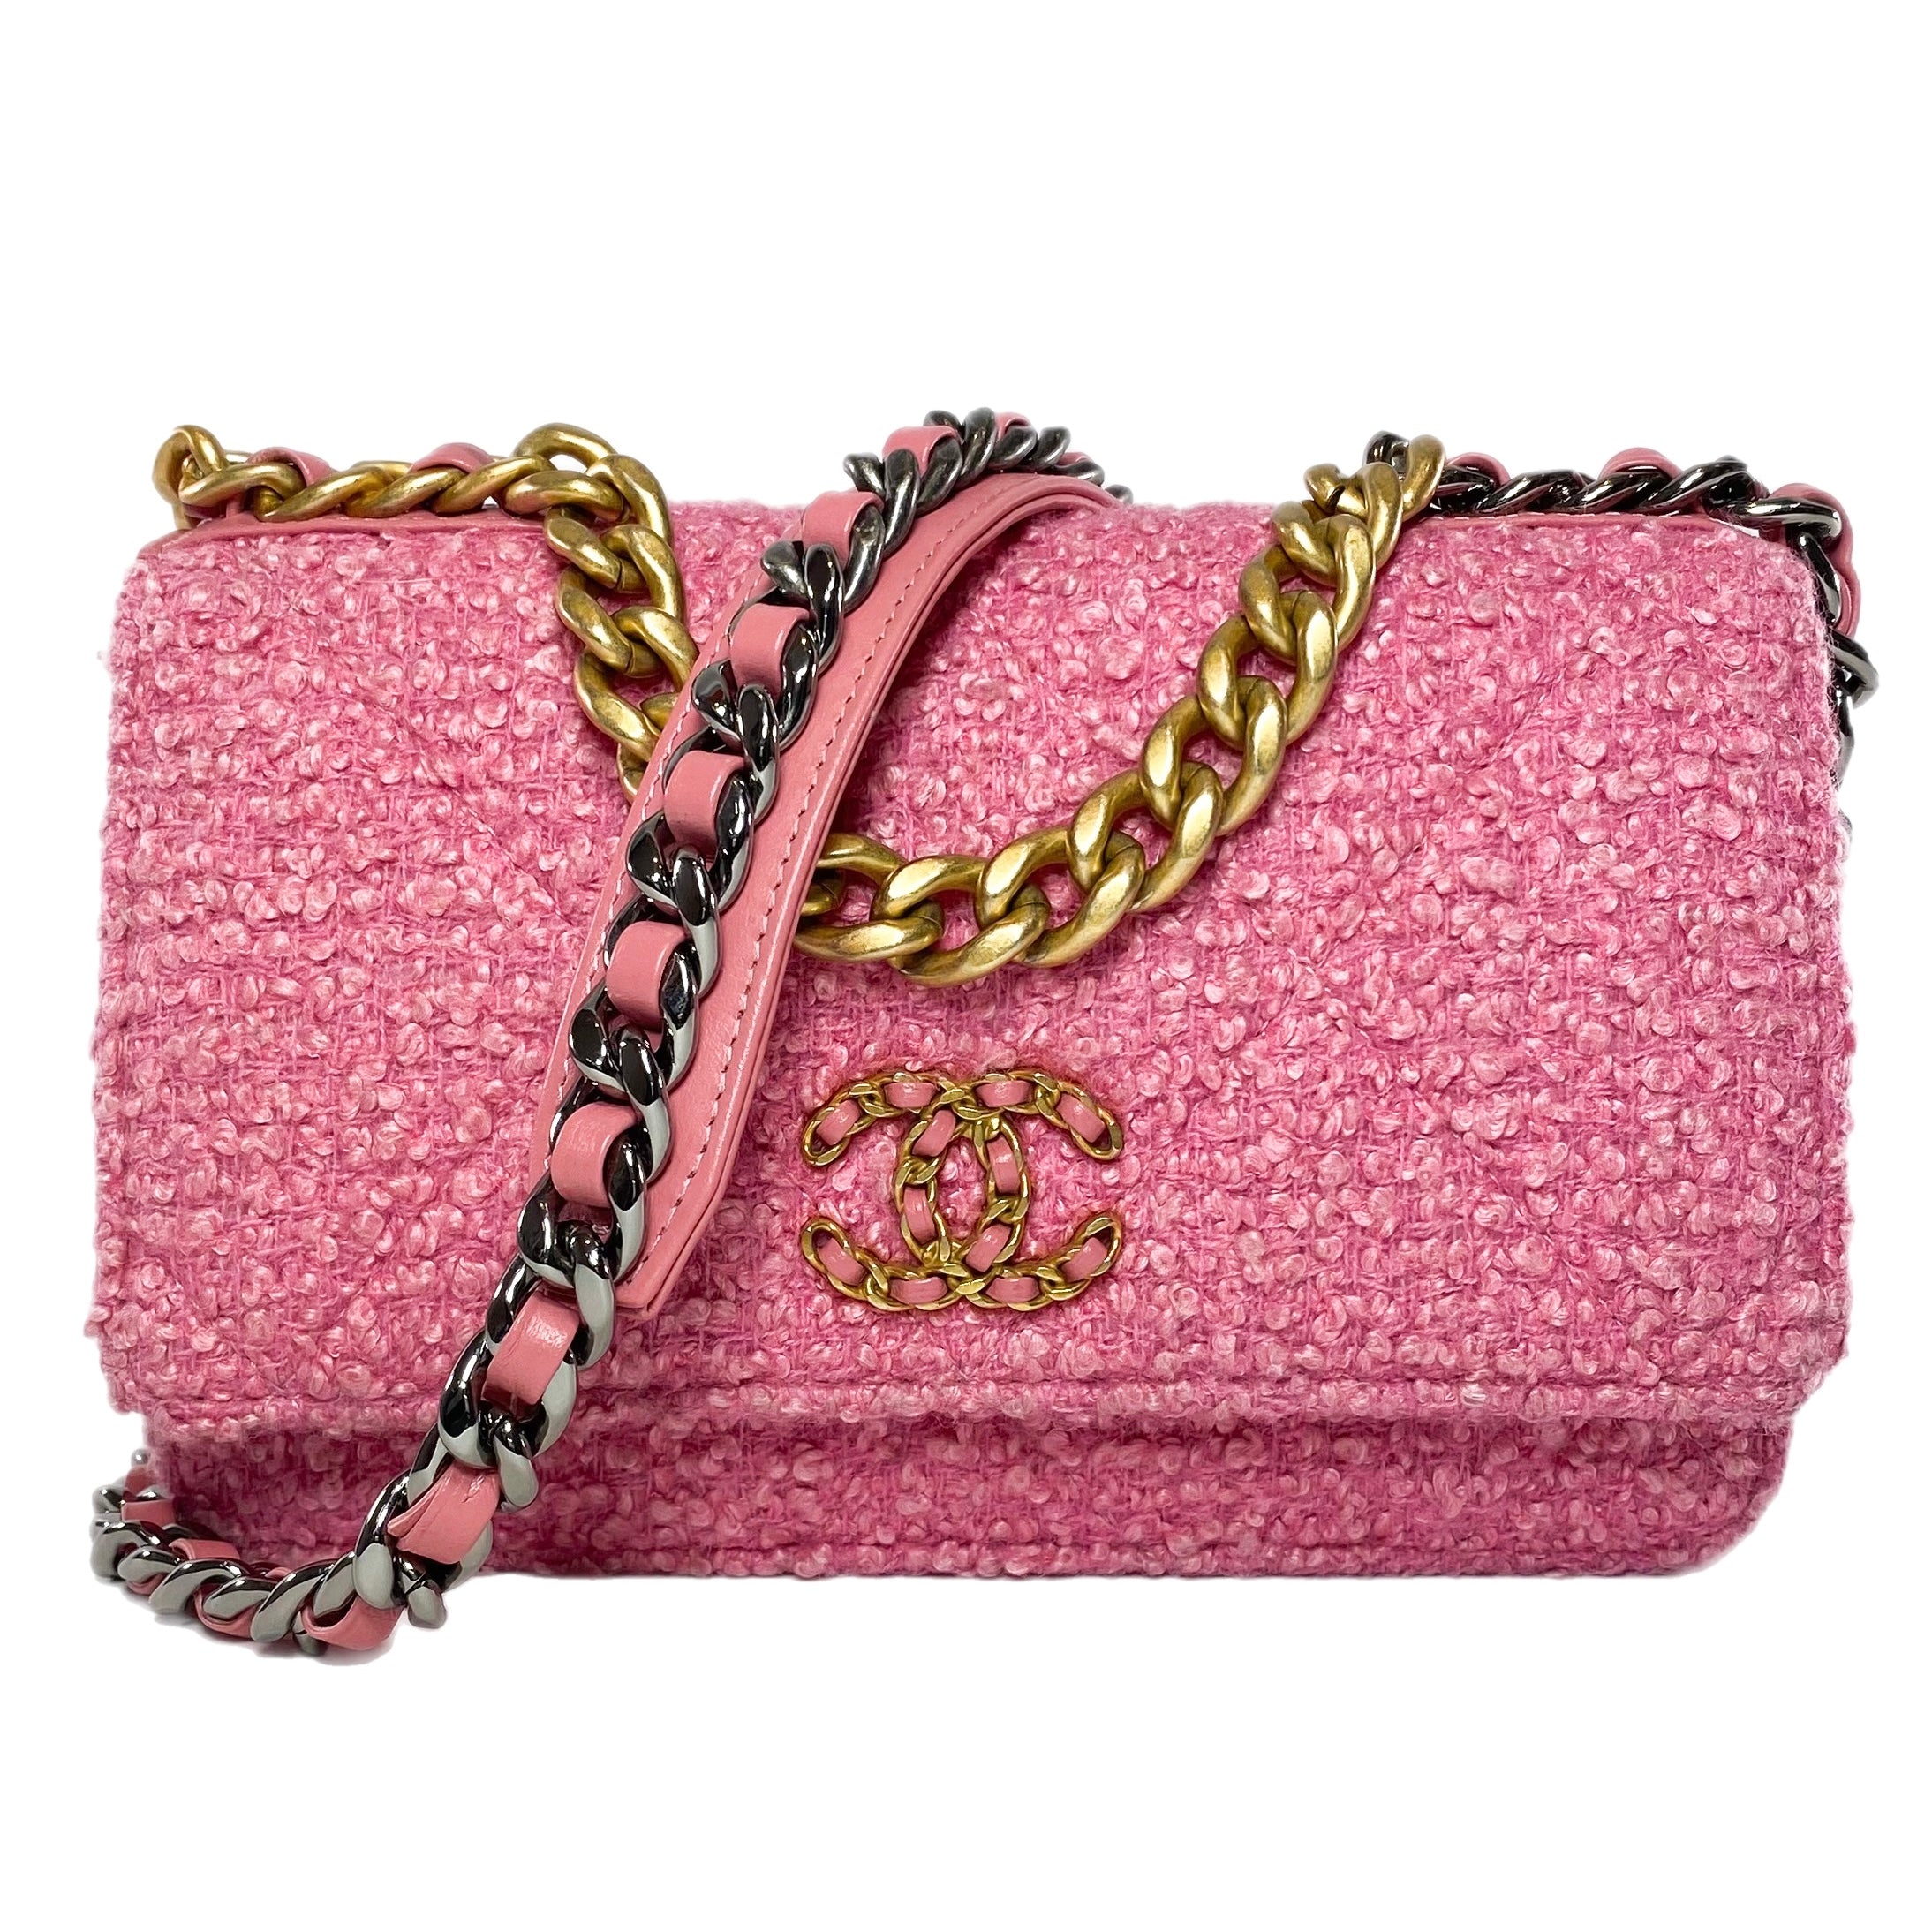 Chanel Pink Tweed Wallet On Chain 19